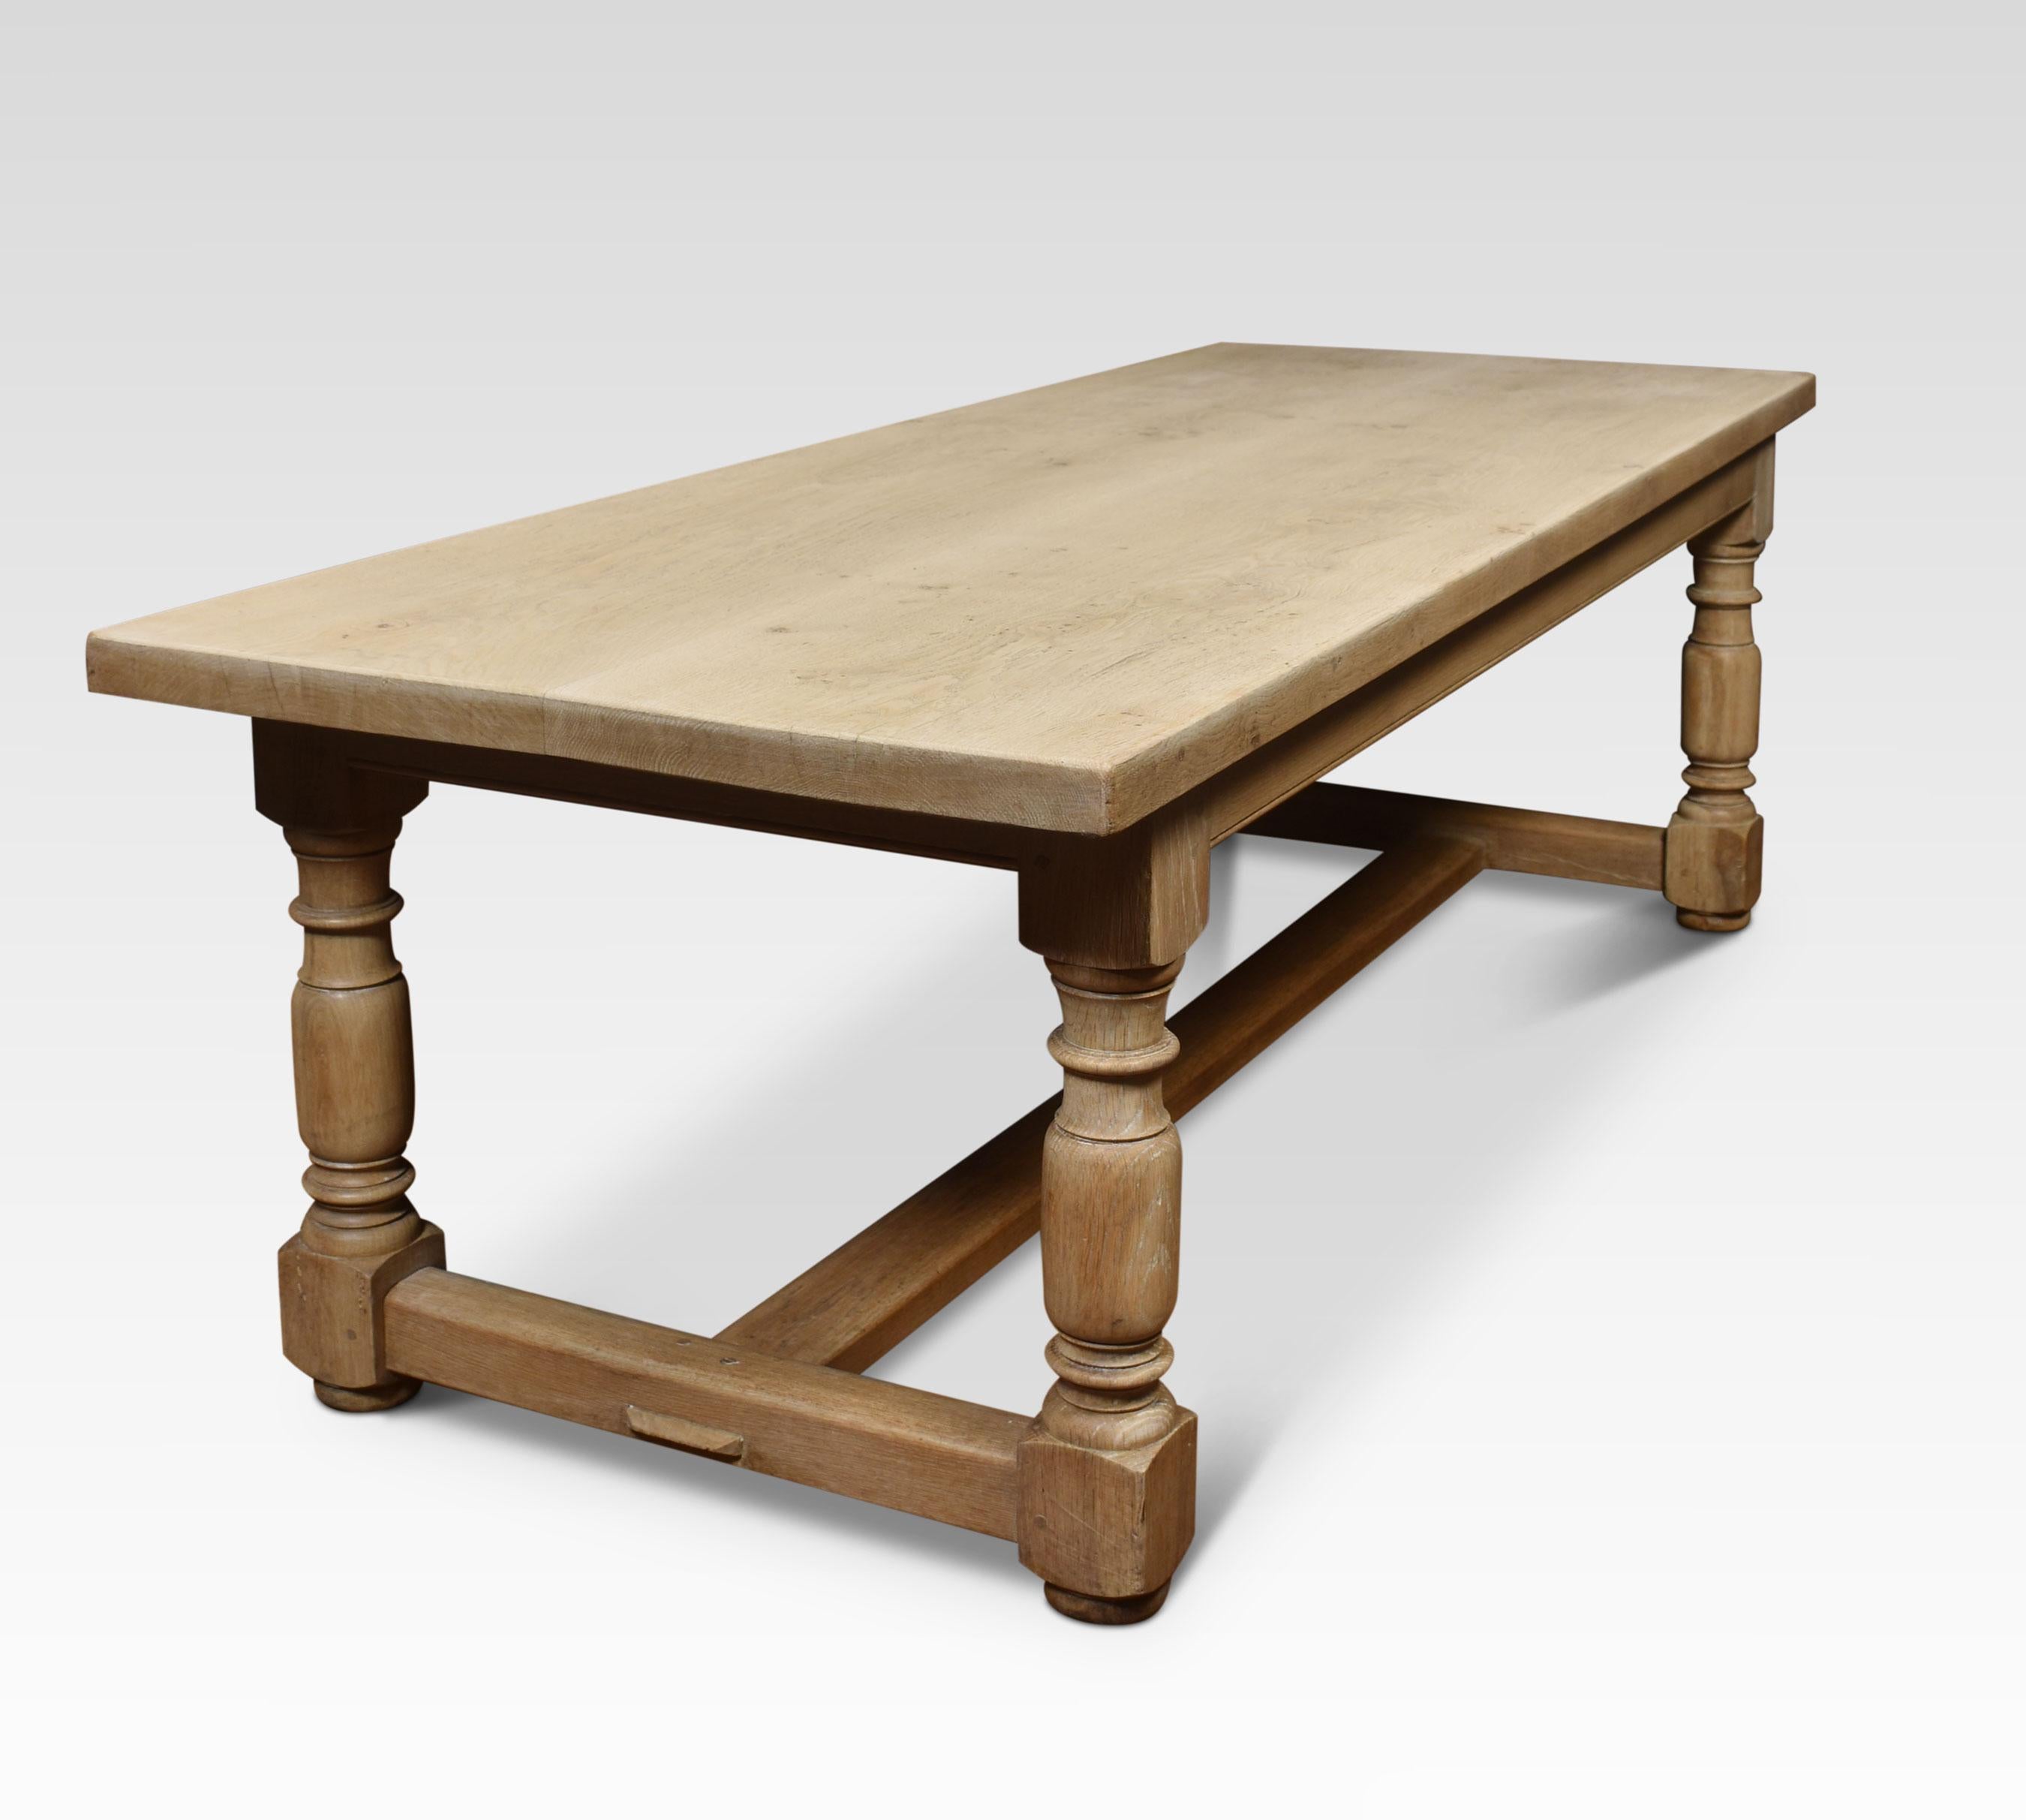 19th Century Bleached Oak Plank Top Refectory Table